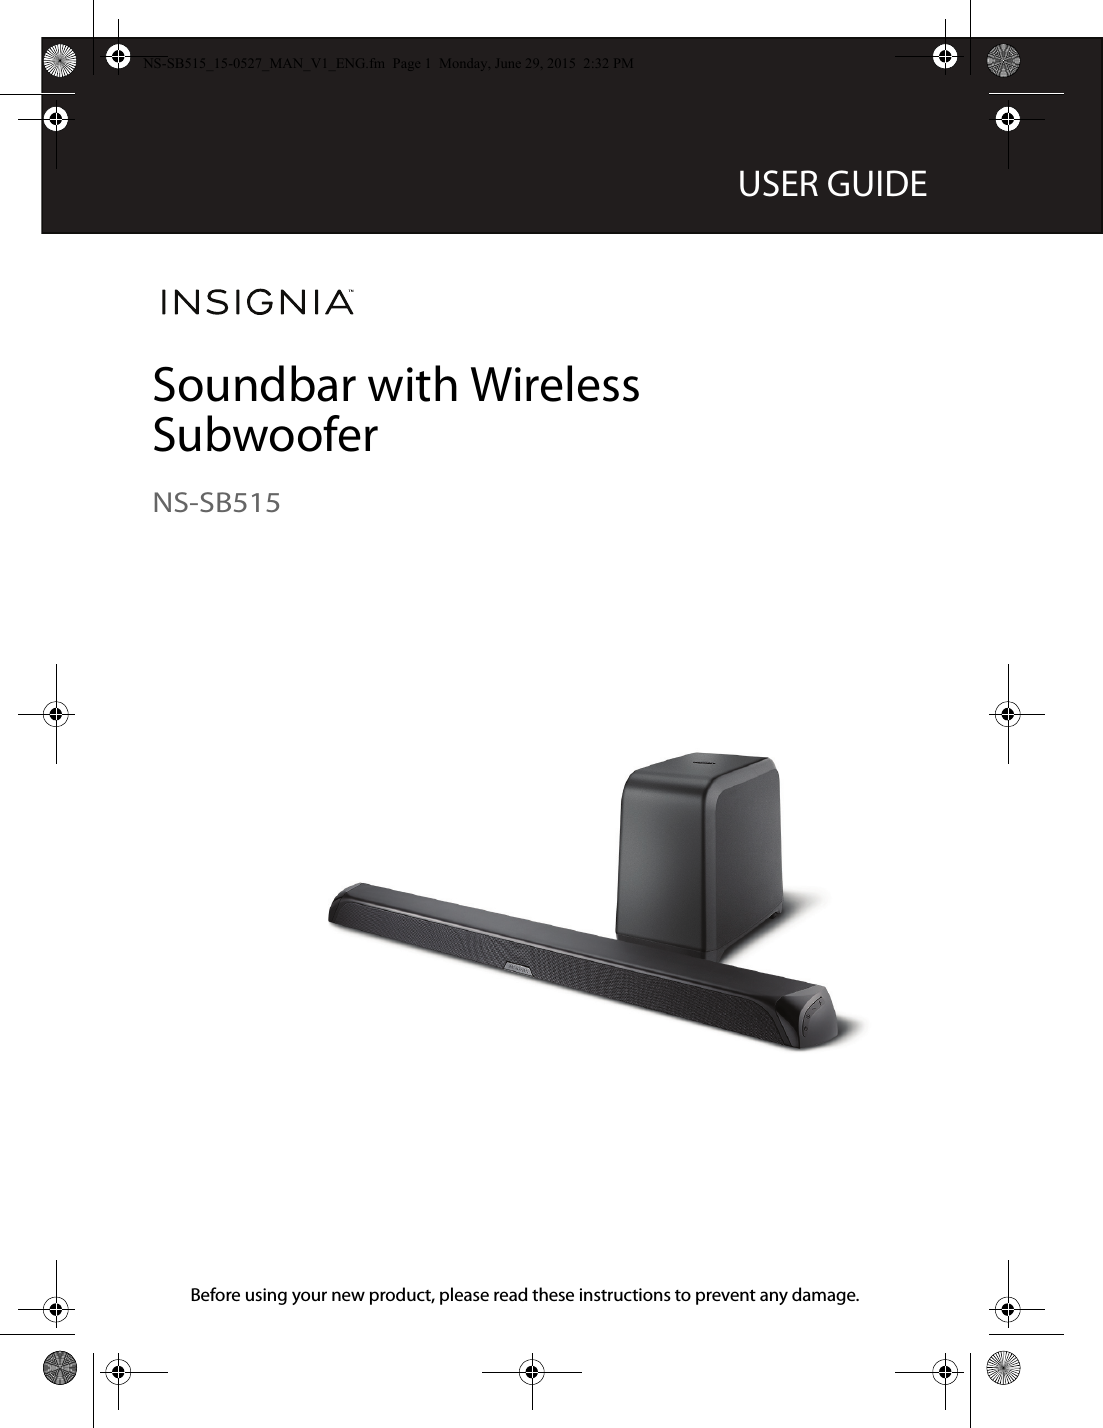 Before using your new product, please read these instructions to prevent any damage.USER GUIDESoundbar with Wireless SubwooferNS-SB515NS-SB515_15-0527_MAN_V1_ENG.fm  Page 1  Monday, June 29, 2015  2:32 PM